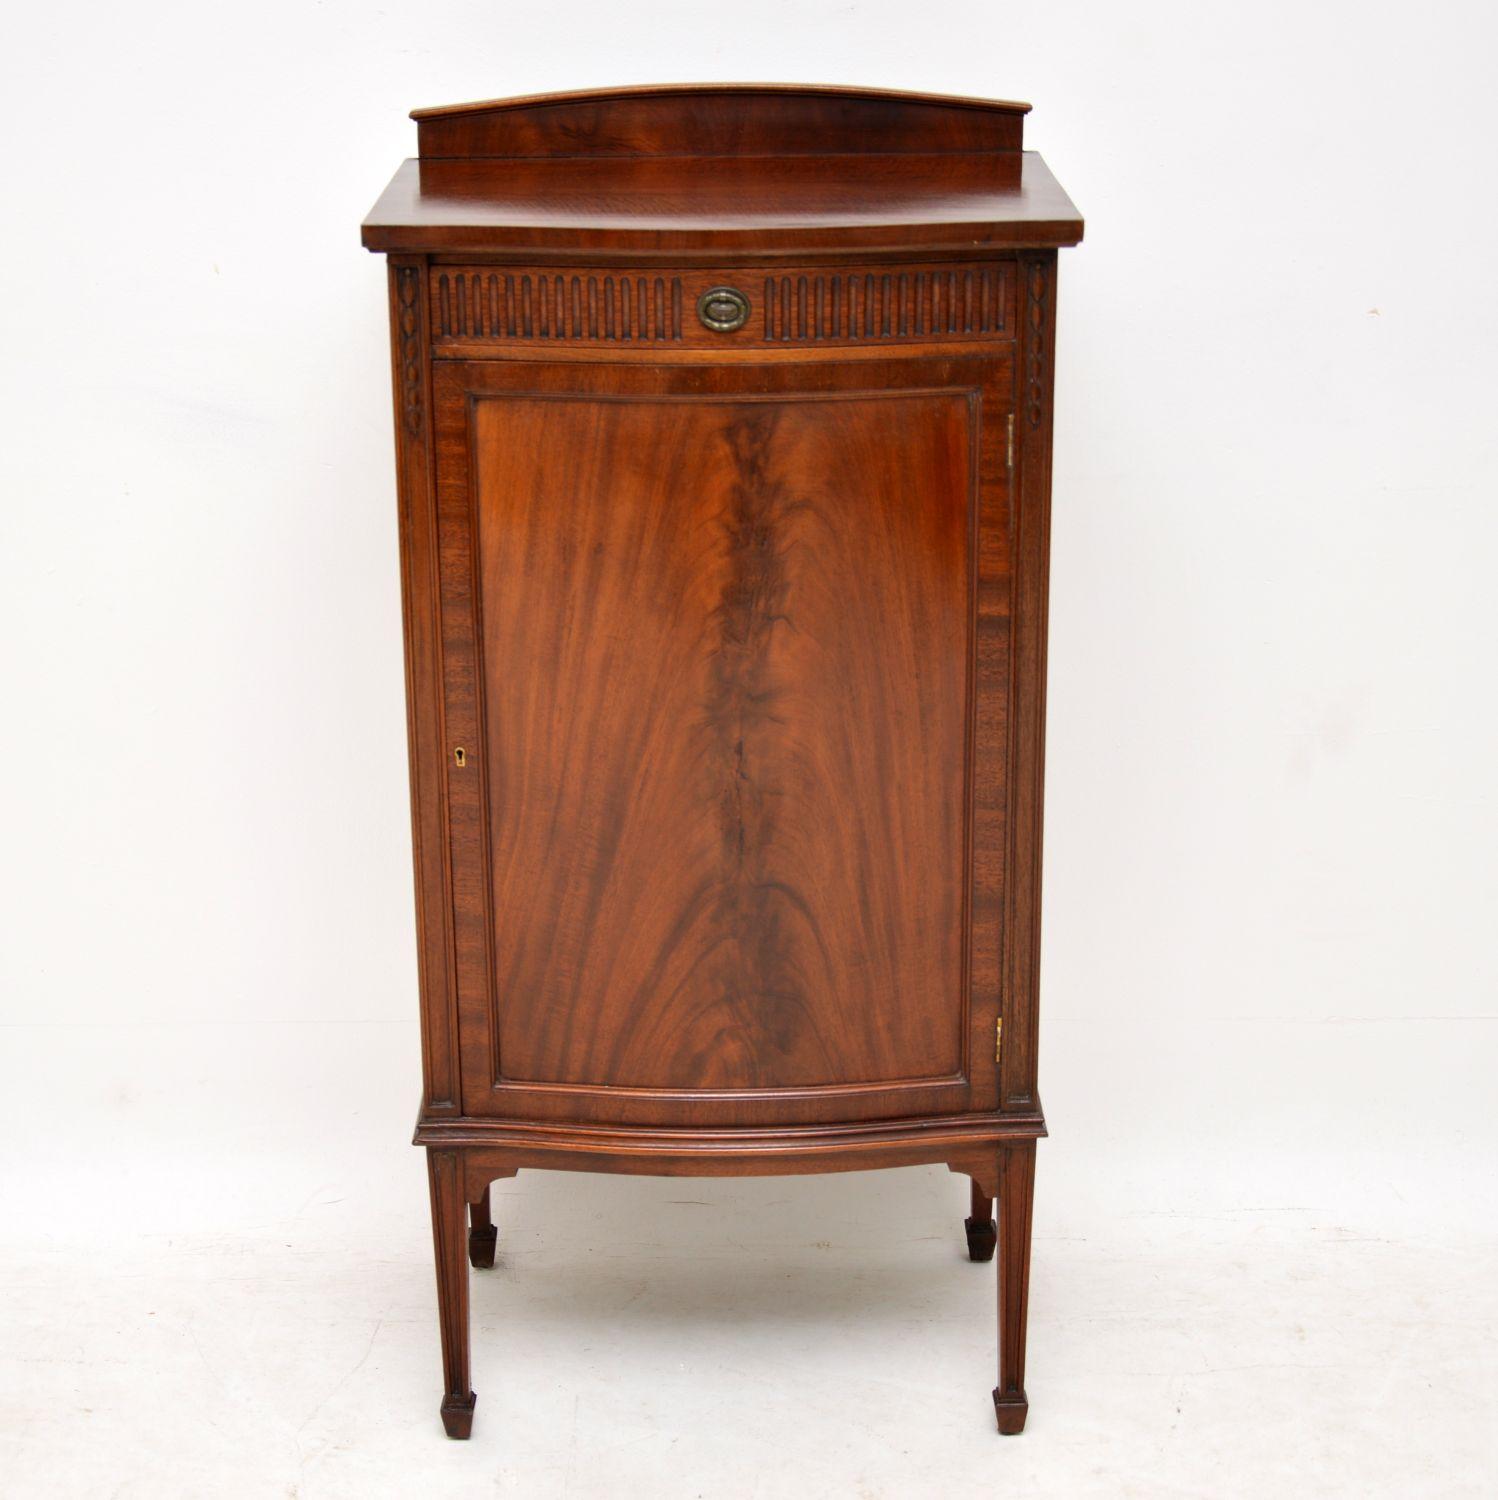 Antique Edwardian mahogany bow fronted cabinet with a flame mahogany panelled door & sitting on tapered spade end legs. It’s fine quality, in good condition and dates to circa 1890-1910 period. There’s a back gallery on the top and the top surface